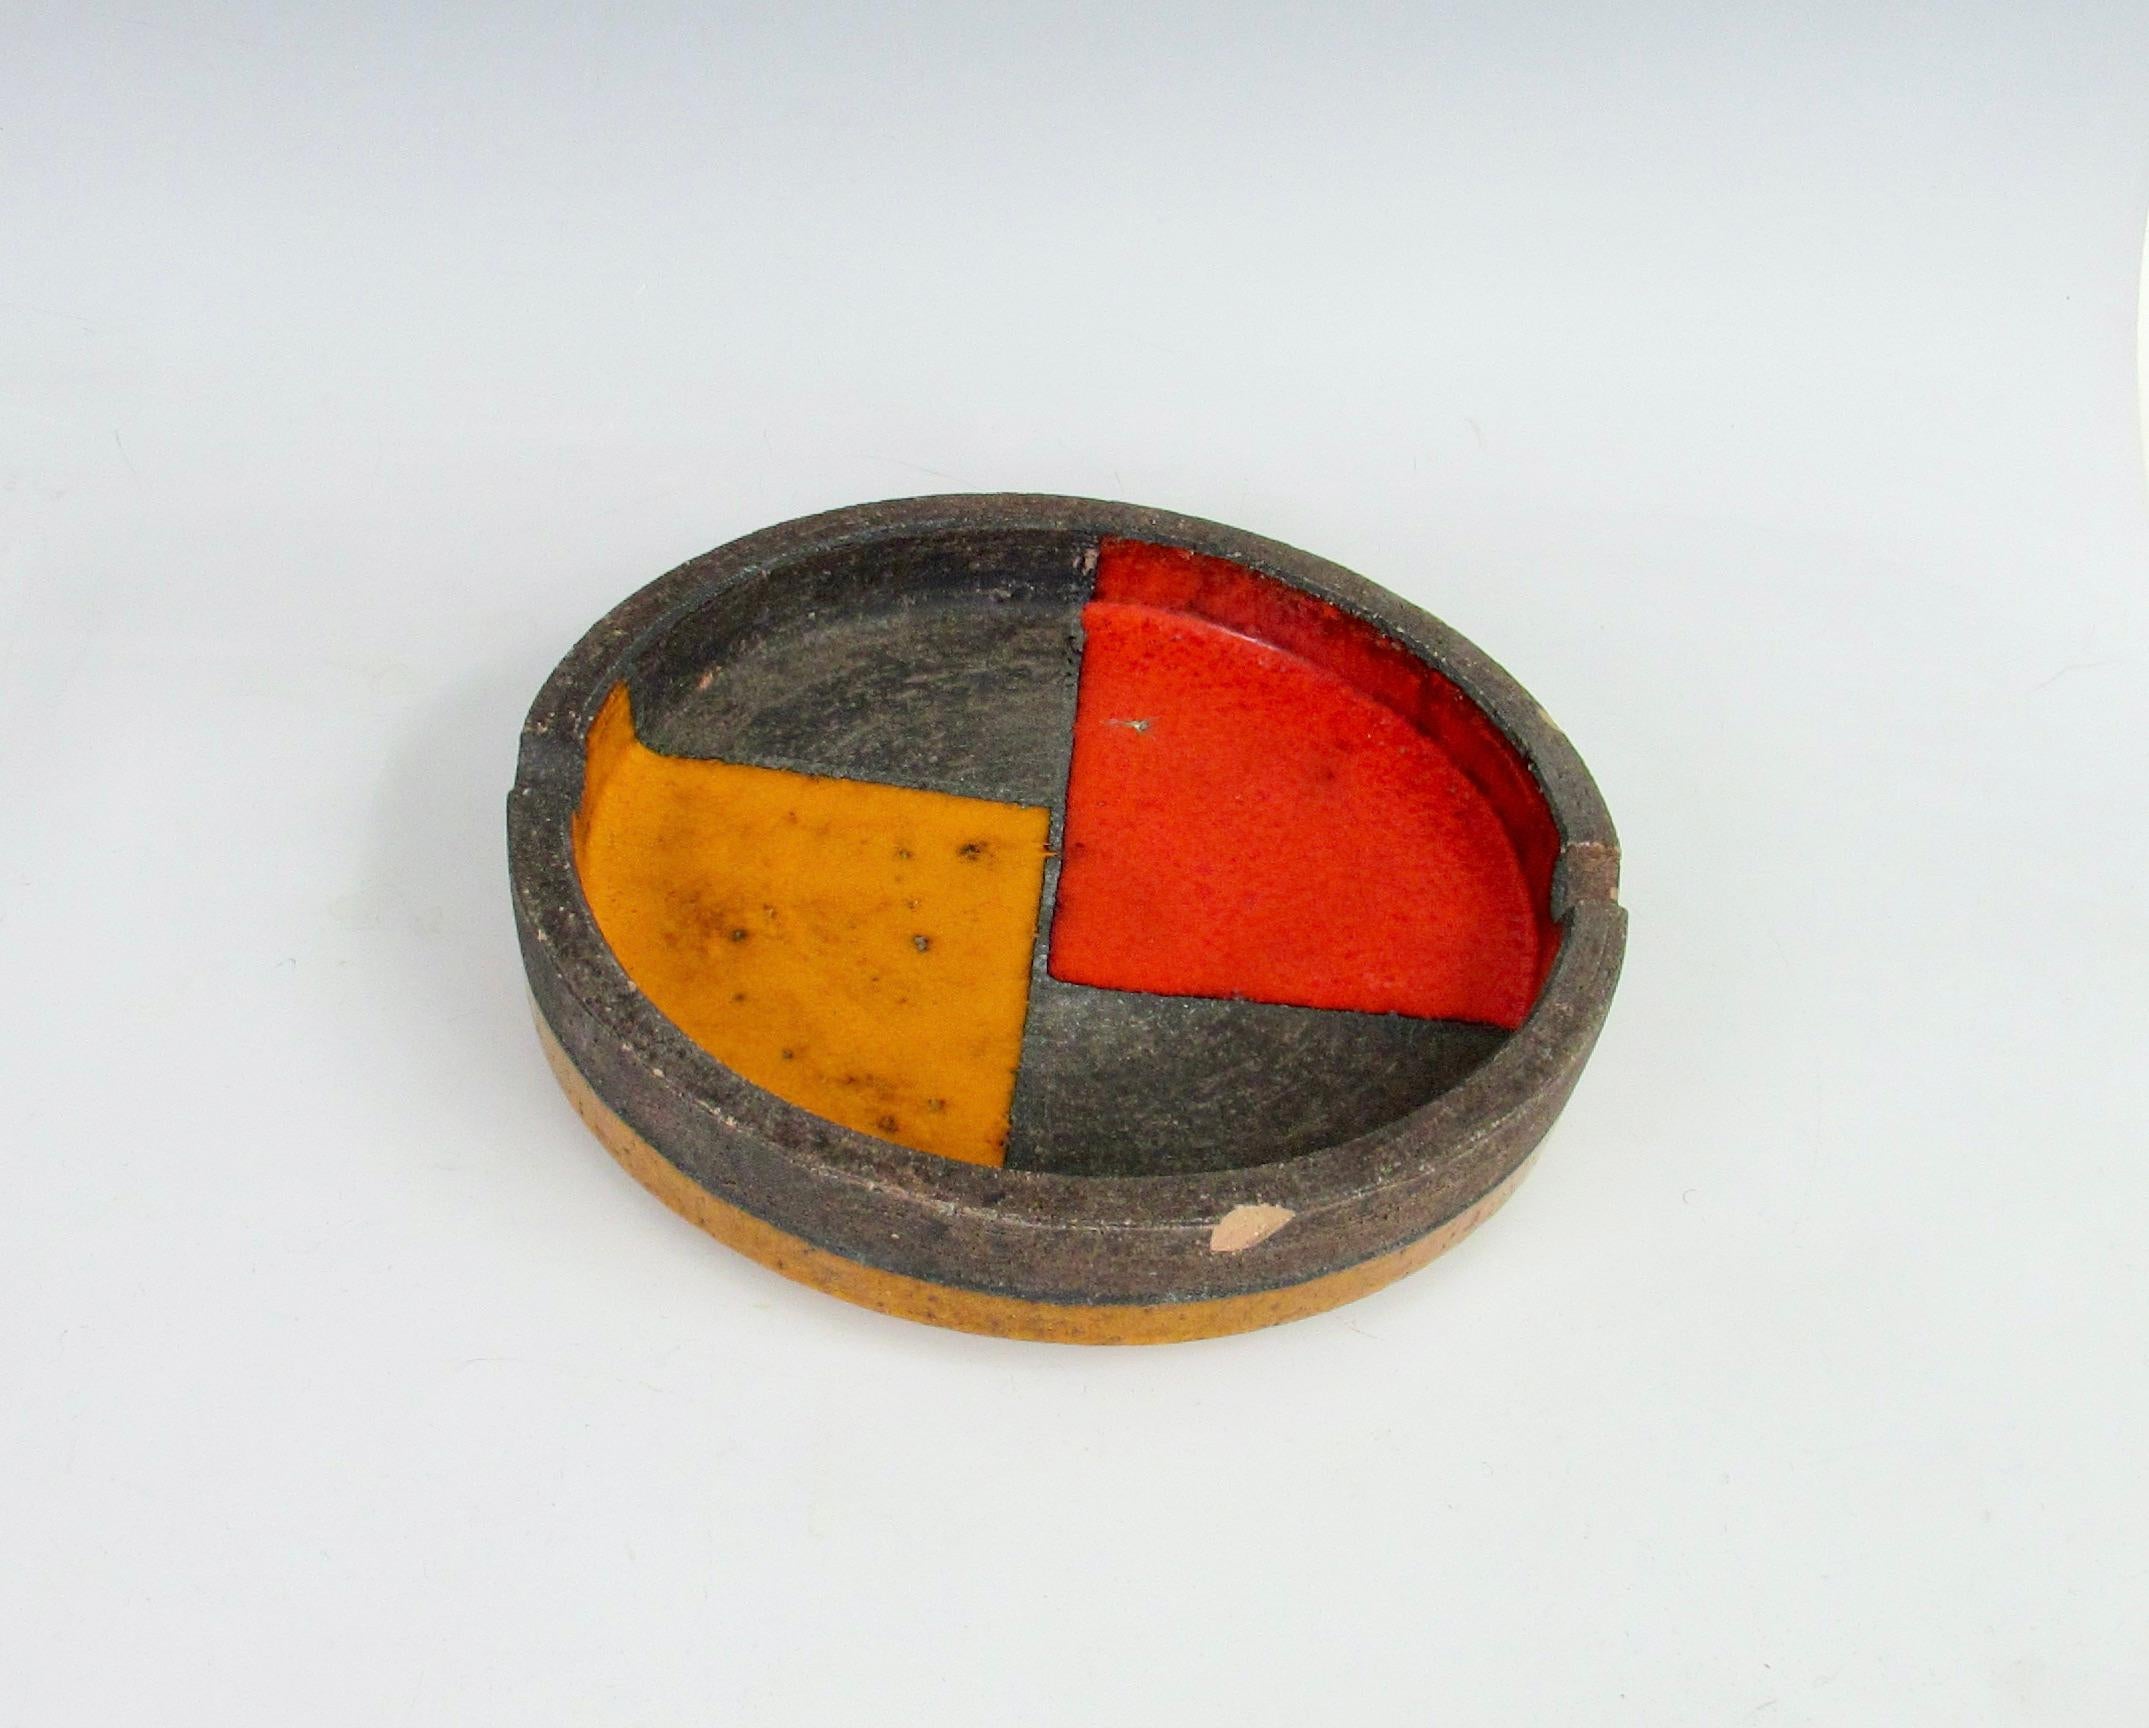 Chunky round ashtray signed Italy . Glazed geometric decoration of orange and red over raw terra cotta base . There are two edge chips and one chip in the red glaze . 